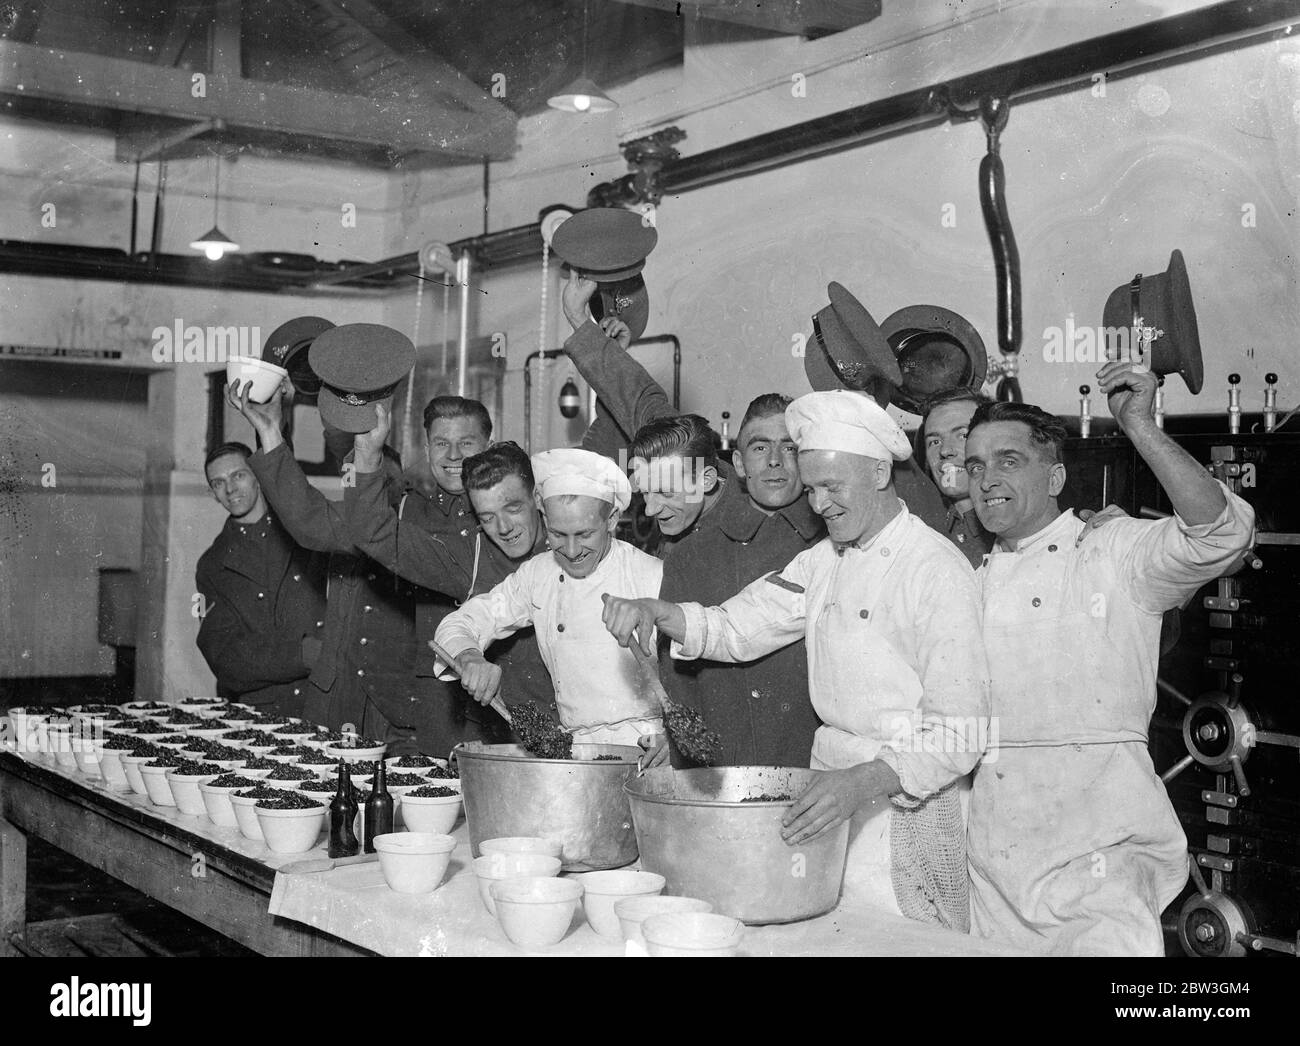 Woolwich barracks troops are making their own christmas pudding . For the first time men of the Royal Artillery at Woolwich Barracks are making their own Christmas puddings instead of buying them from outside . Six hundred men have to be catered for in the messroom and the work of preparing and mixing the puddings has already commenced . Liberal quantities of brand and stout are the most popular ingrediants . Photo shows , cheers for the cook and the puddings at woolwich barracks . 7 December 1935 Stock Photo